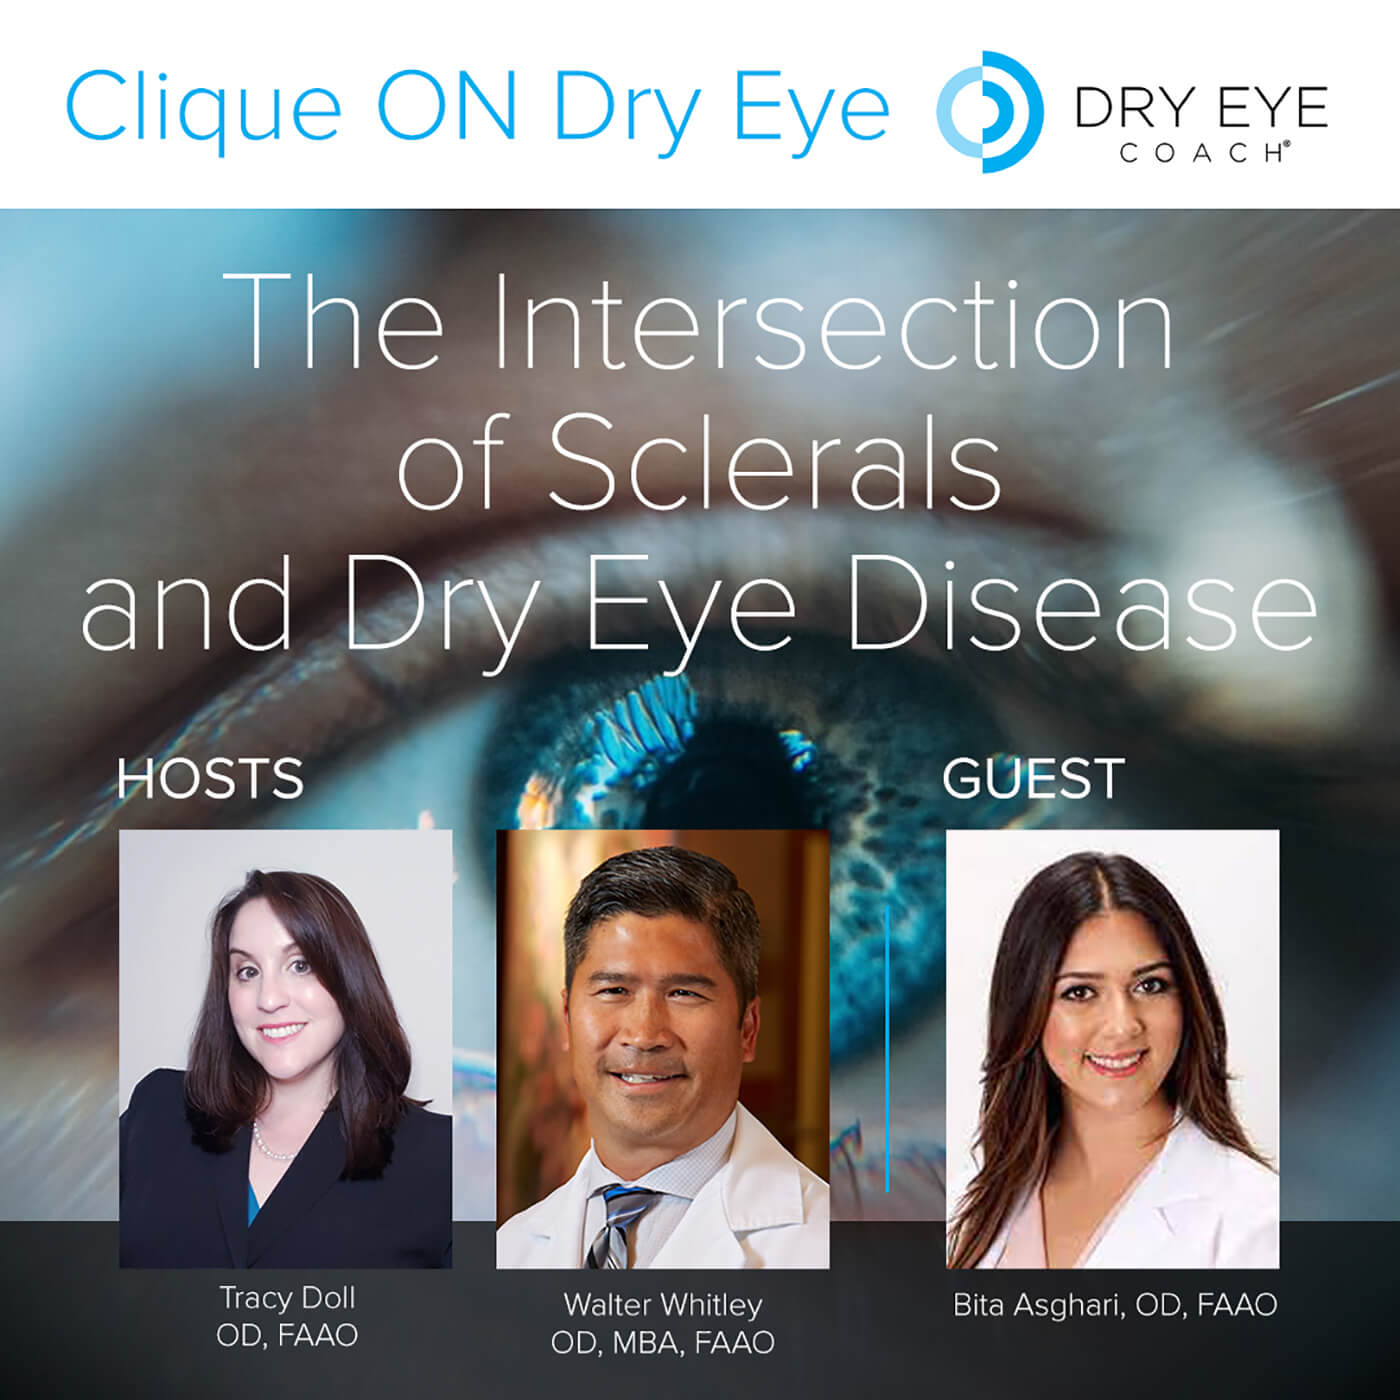 The Intersection of Sclerals and Dry Eye Disease